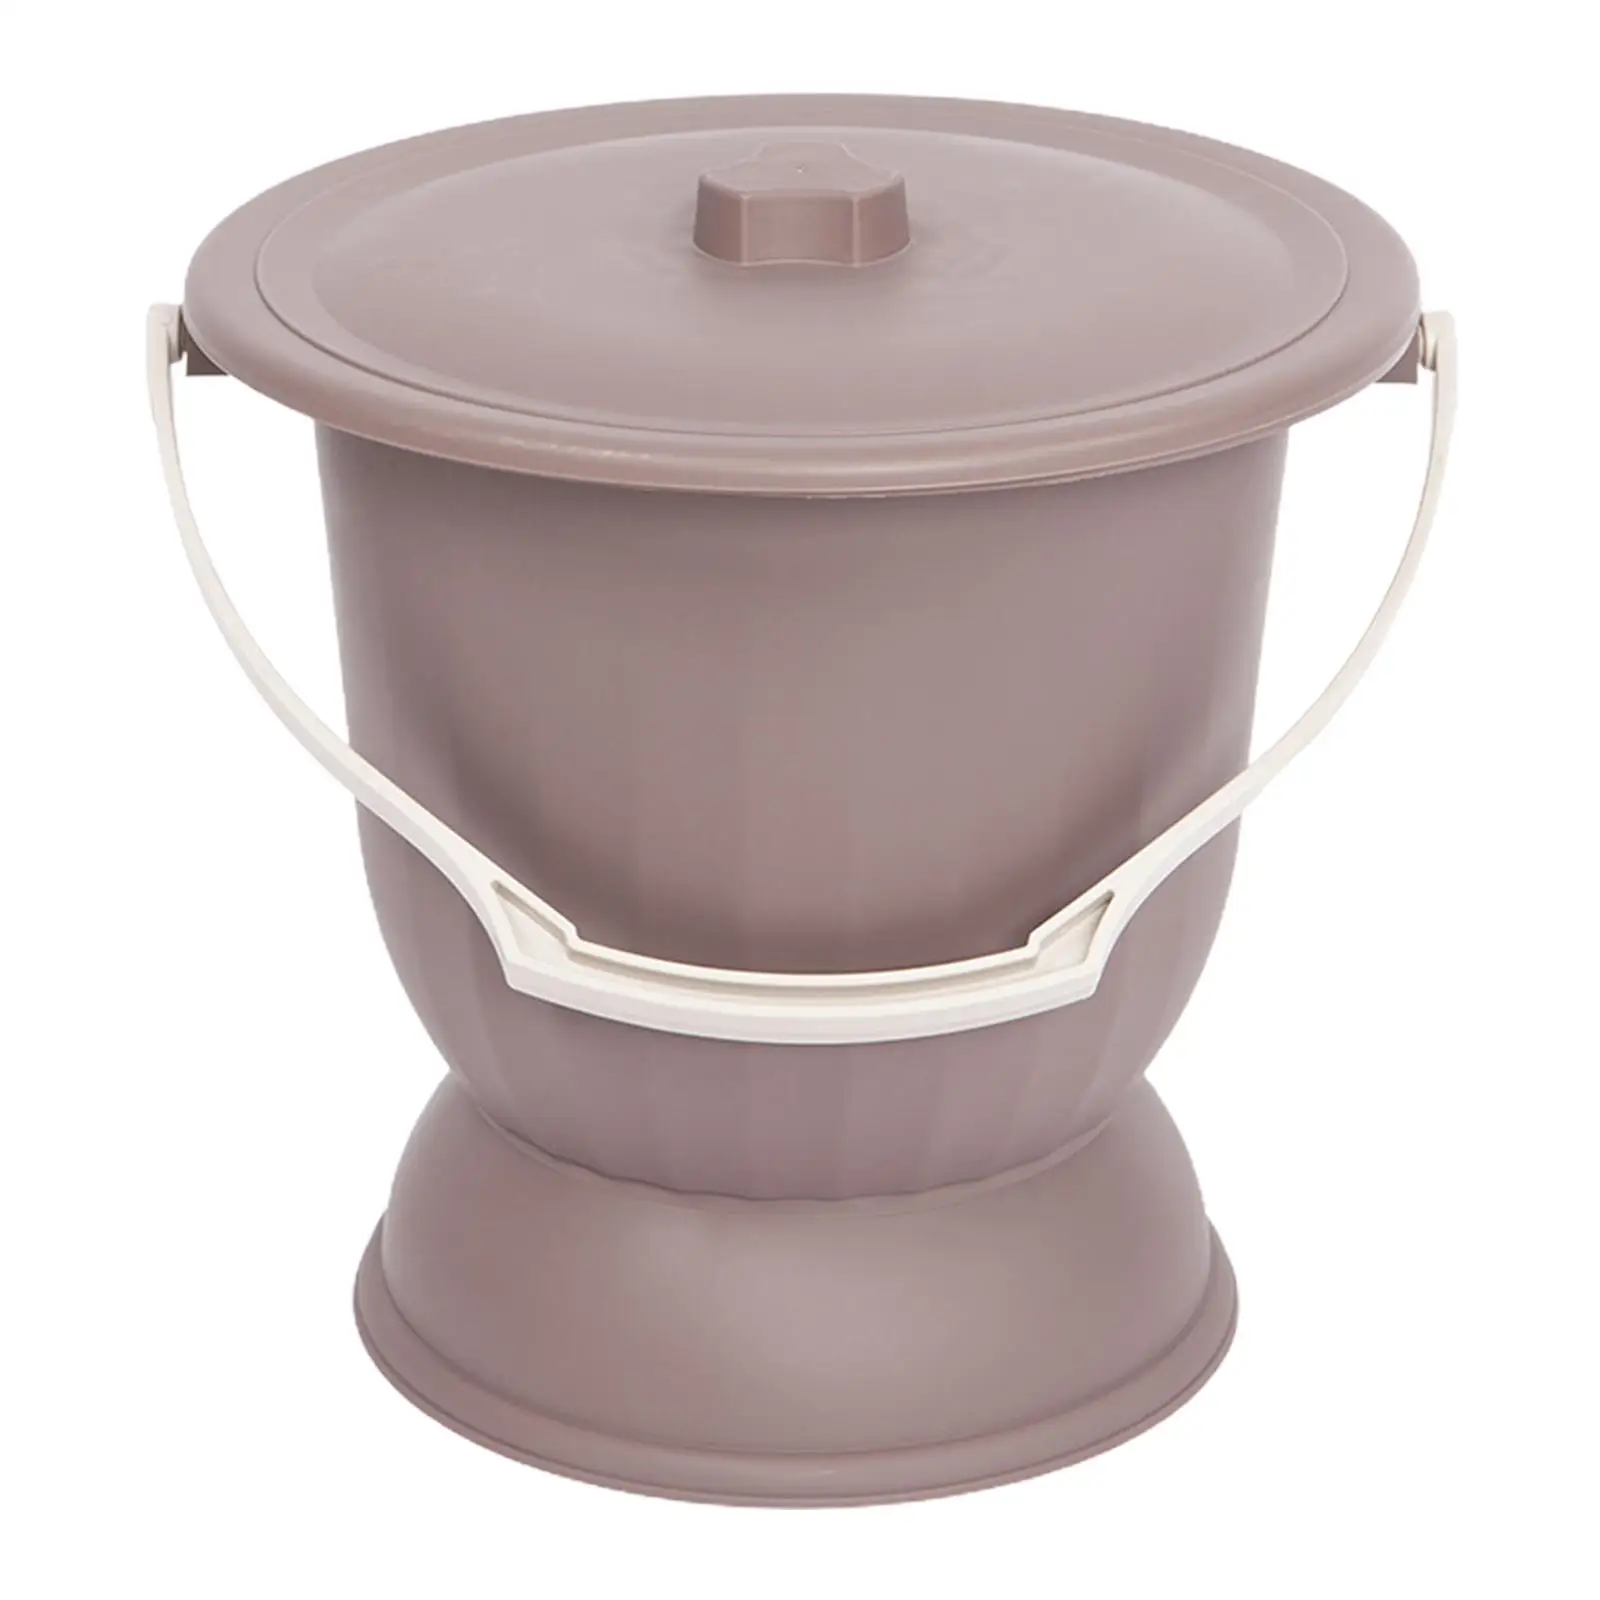 Household Spittoon with Lid Thickened Bedside Commode Bucket Urine Bottle Bedpan for Kids Adults Elder Woman Children